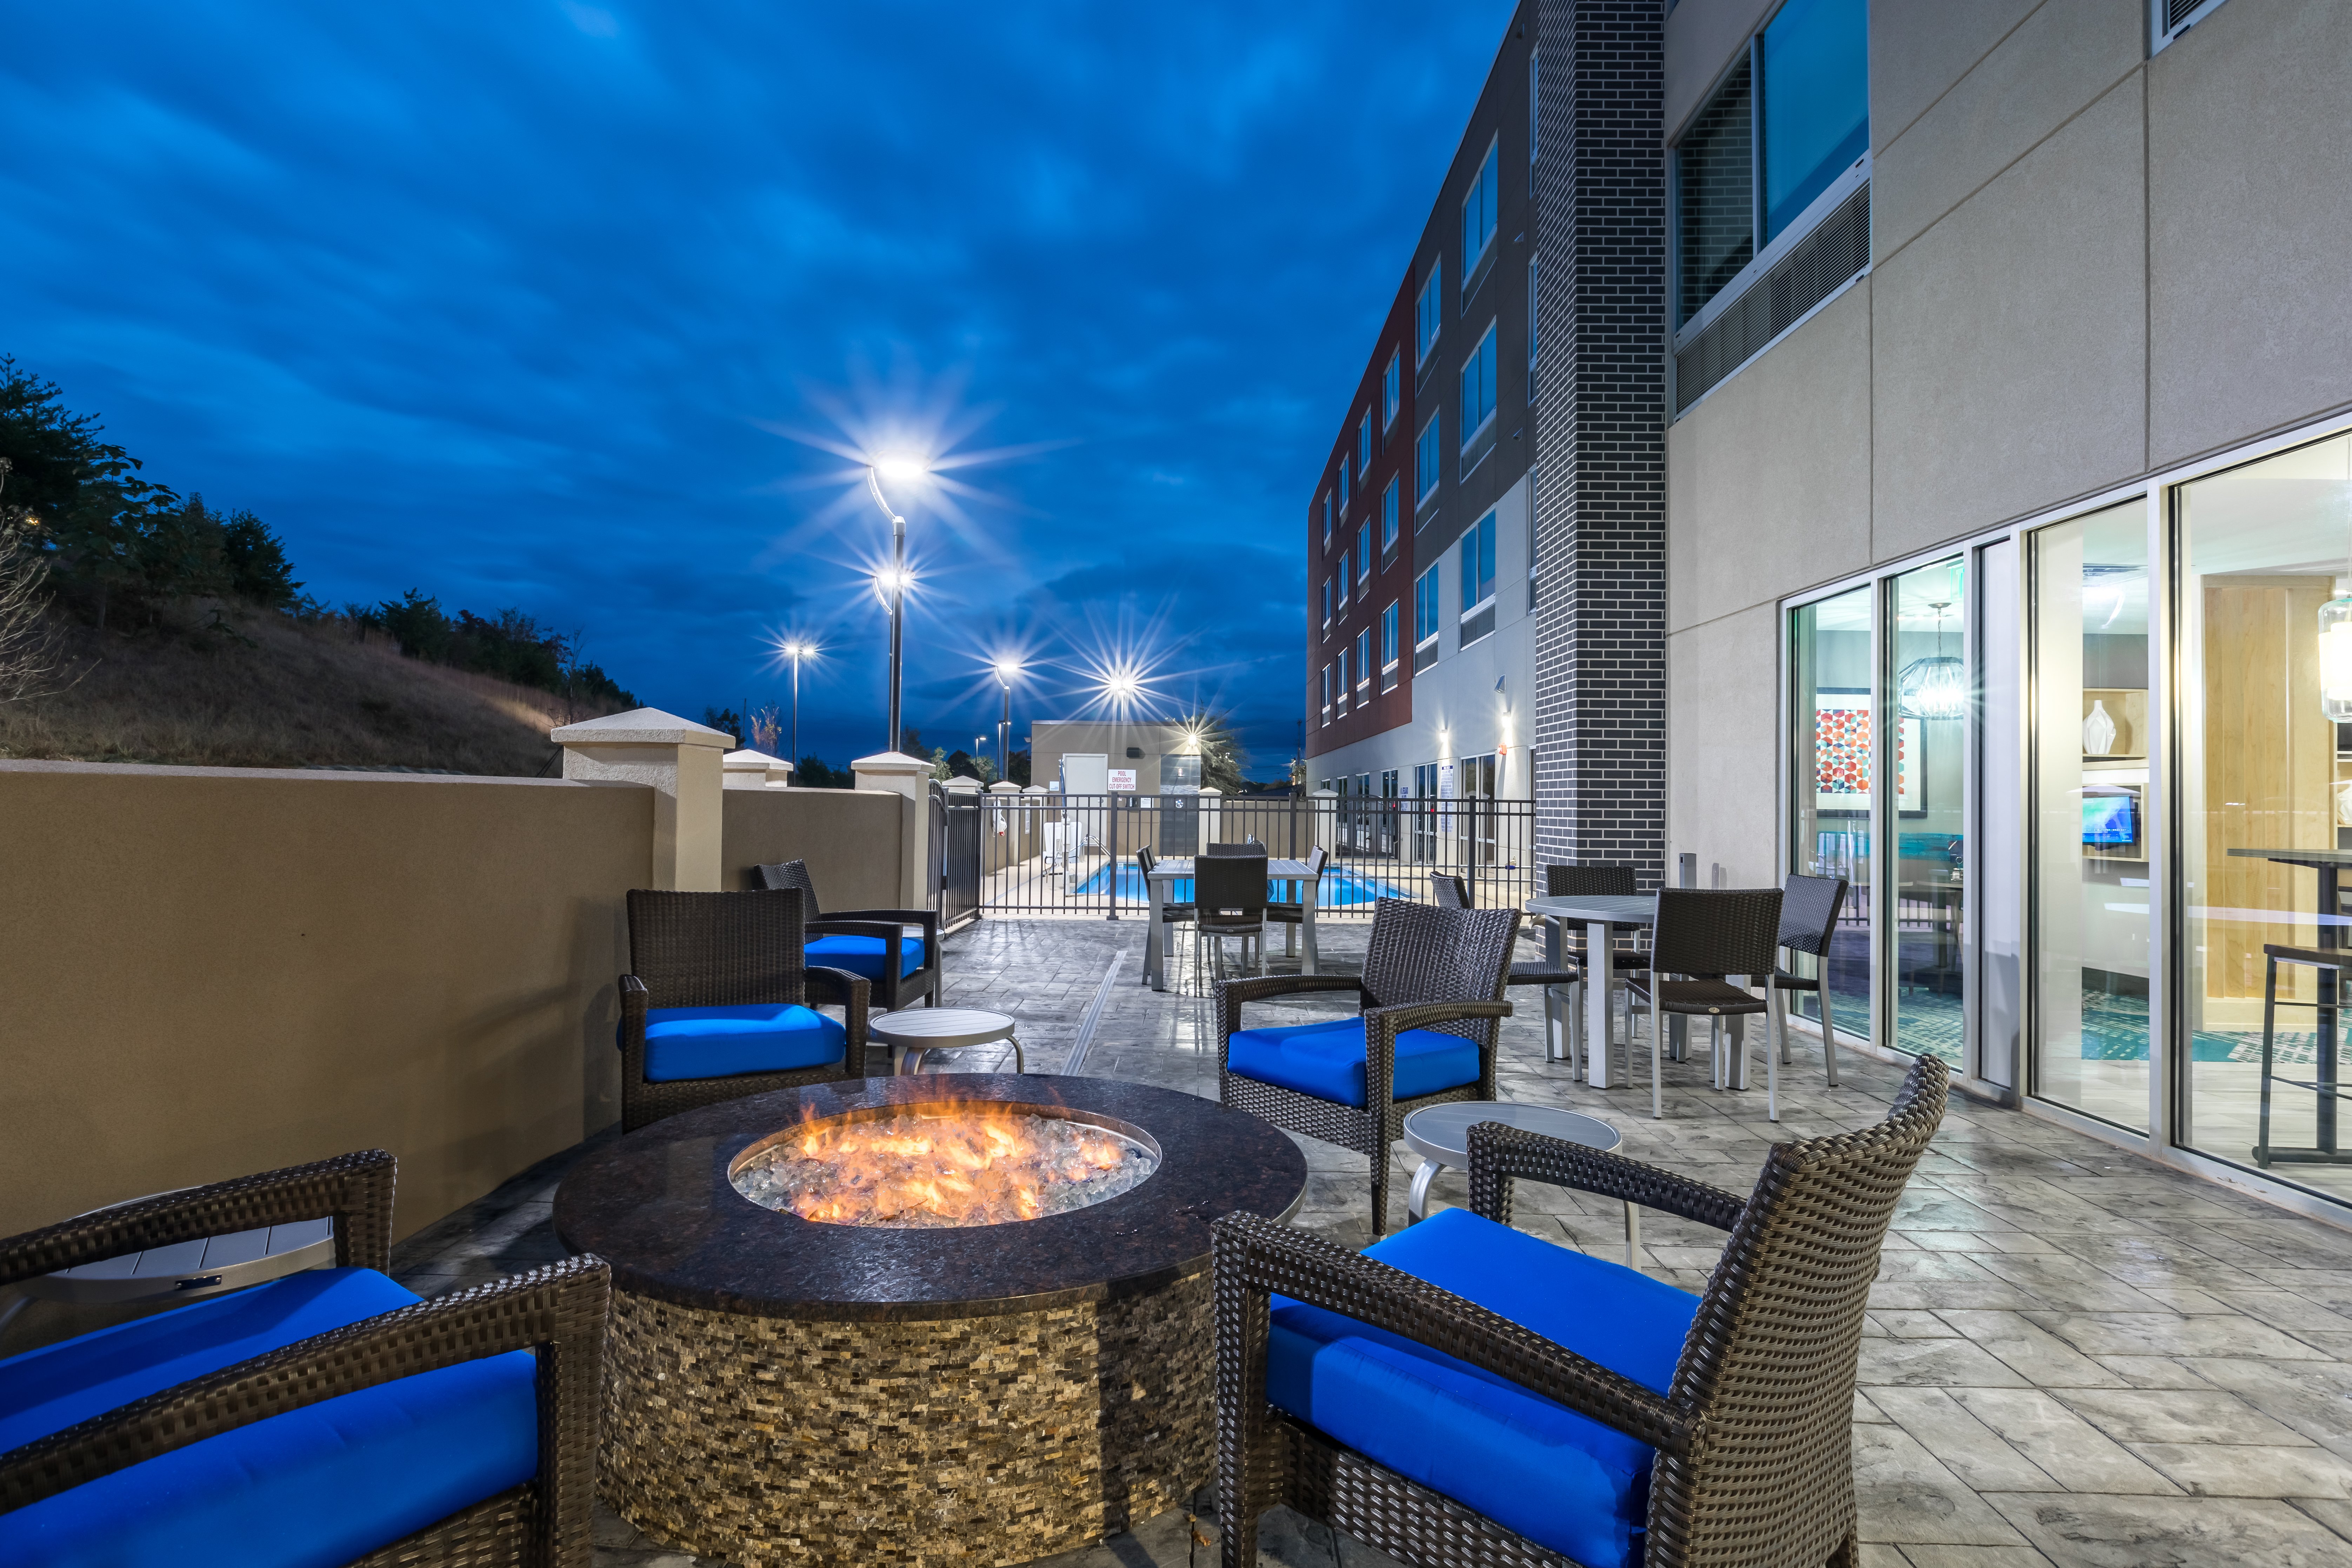 relax after a long day by our firepit and lounging area